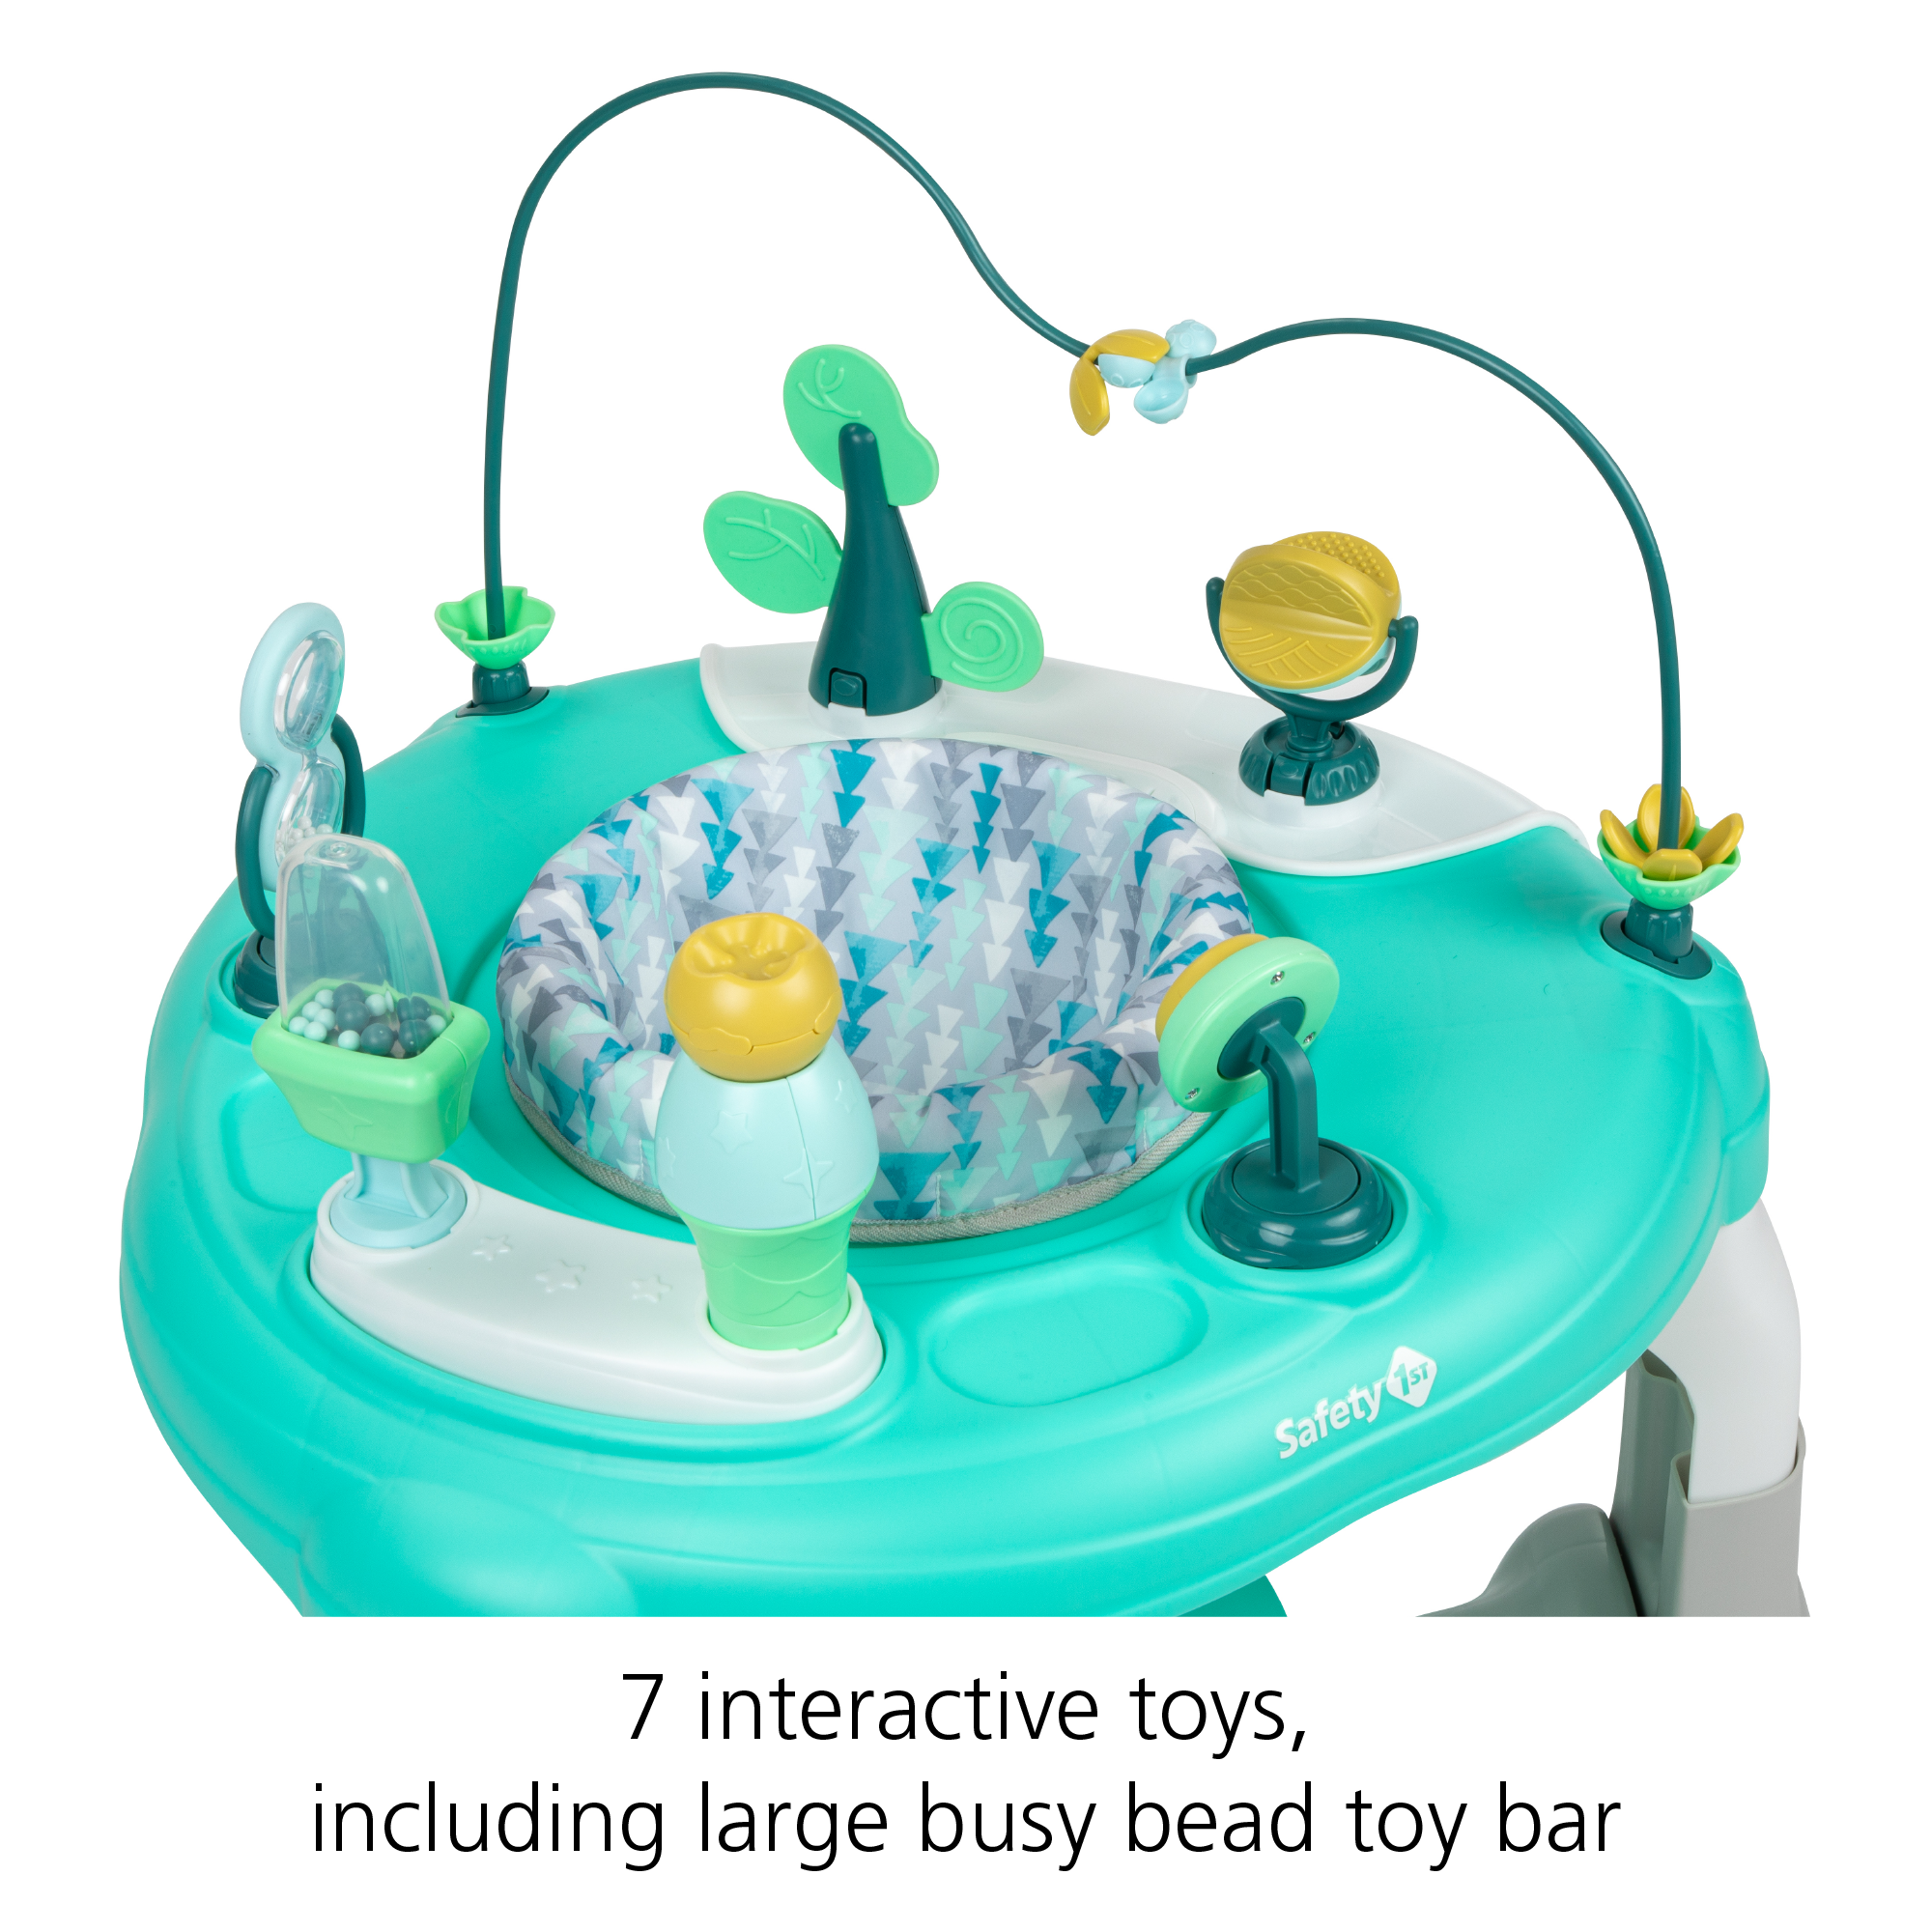 7 interactive toys, including large busy bead toy bar